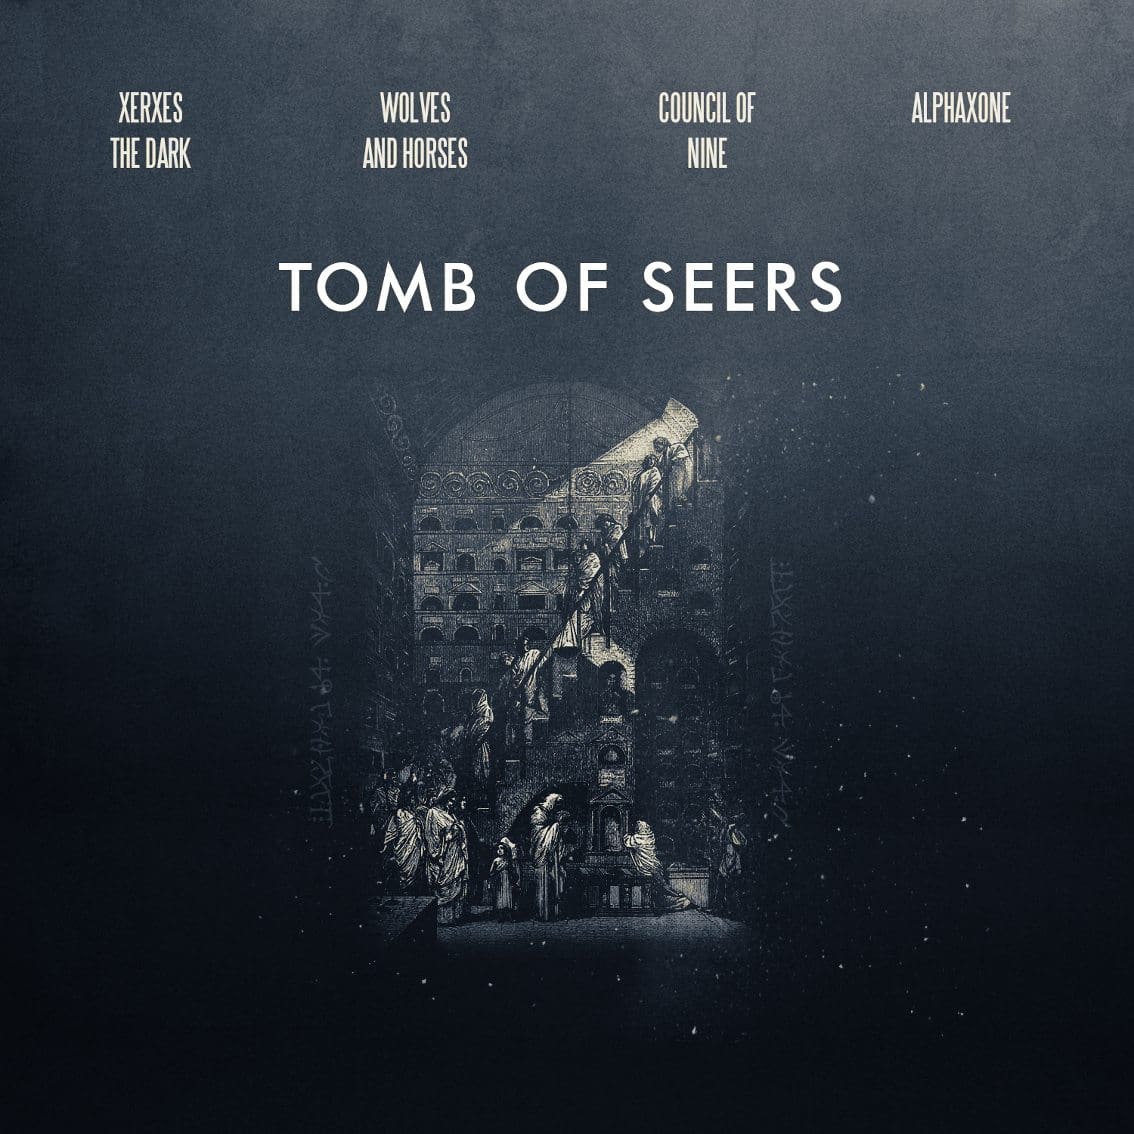 'Tomb of Seers' out on Cryo Chamber, powered by the 4 ambient acts Council of Nine, Alphaxone, Xerxes The Dark and Wolves and Horses - listen to it now!